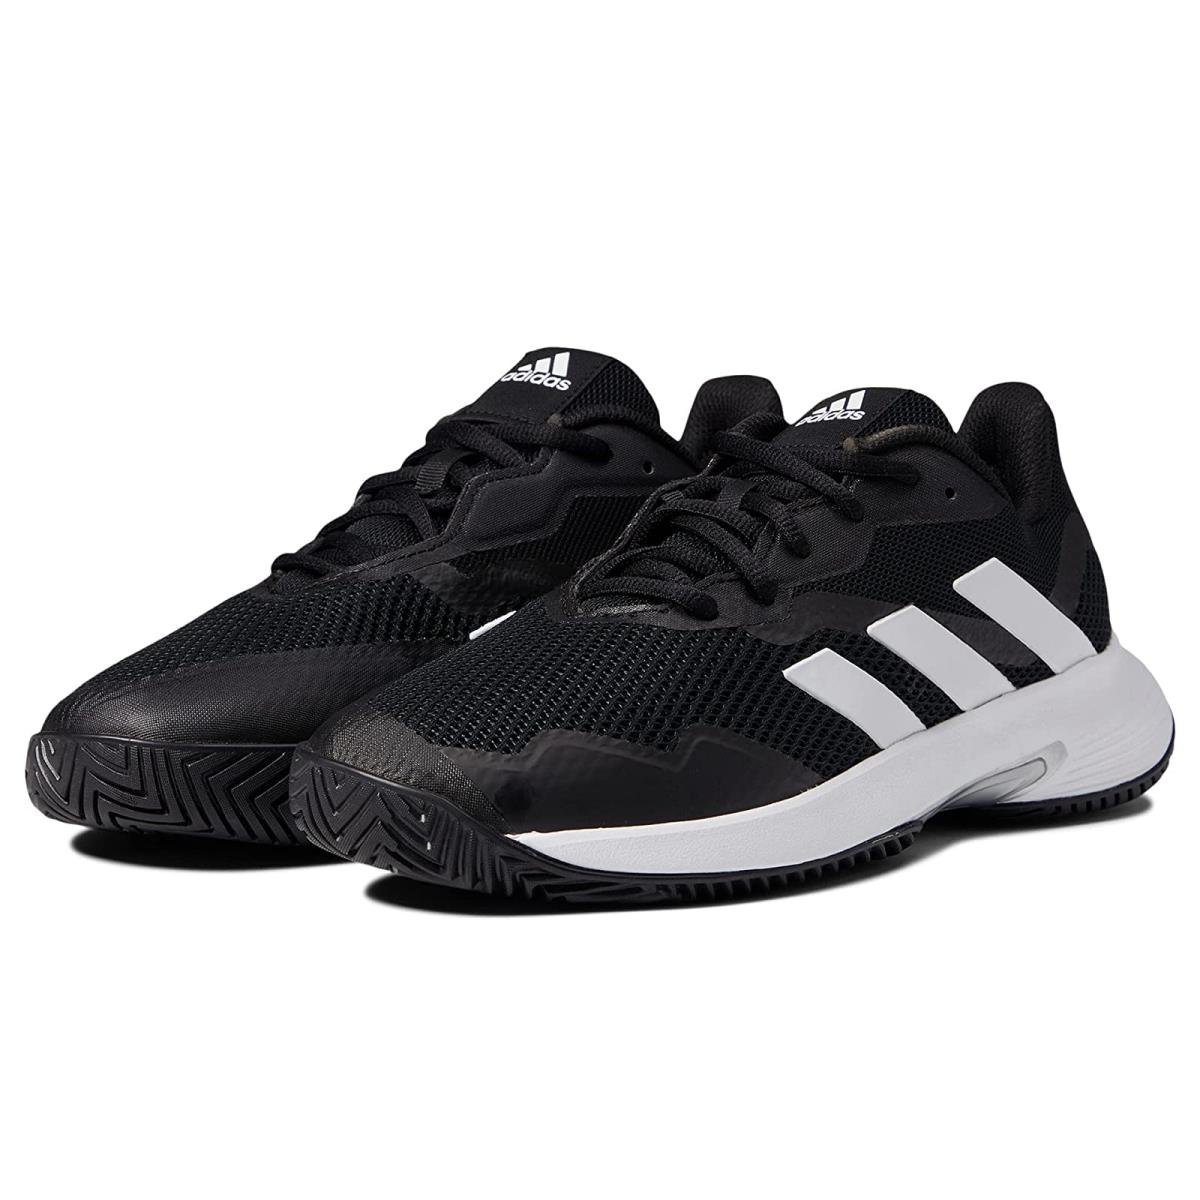 Woman`s Sneakers Athletic Shoes Adidas Courtjam Control Black/White/Silver Metallic